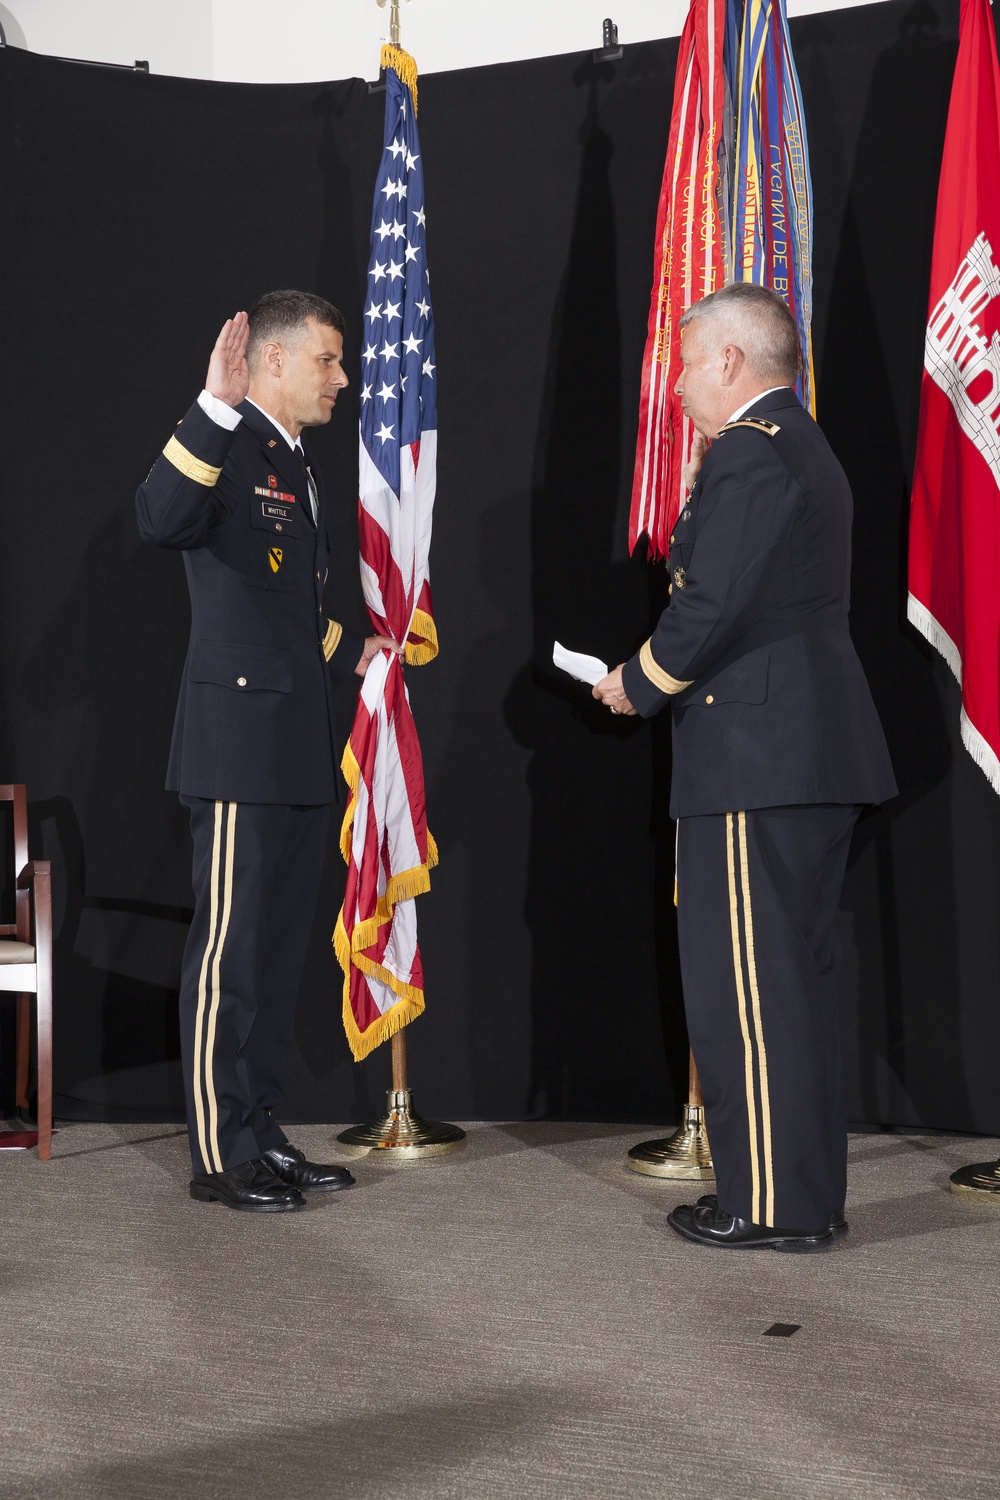 Whittle promoted to rank of Major General